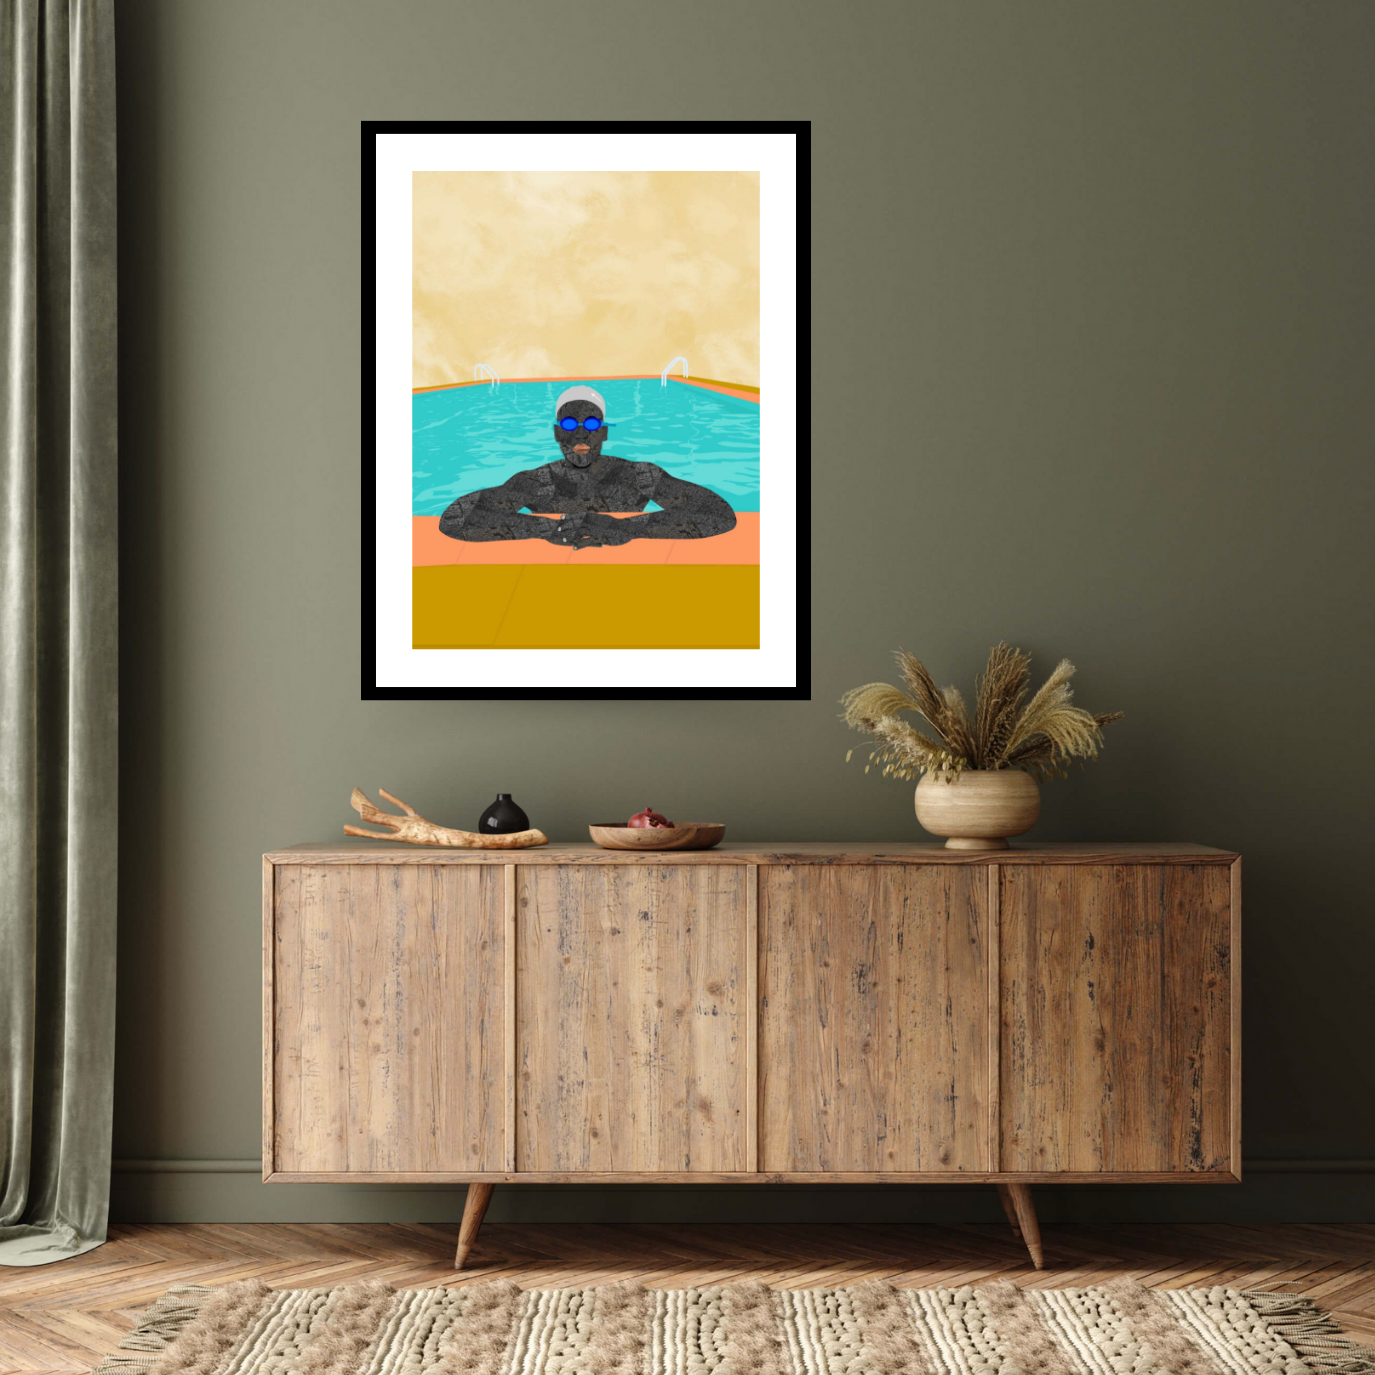 Black framed 'MAN IN A POOL I, 2021' by Osinachi. This captivating digital print encapsulates contemporary aesthetics and cultural nuances, portraying a vibrant scene of a man in a pool. With its rich colours and dynamic composition, this limited edition piece adds a modern flair to any collection.